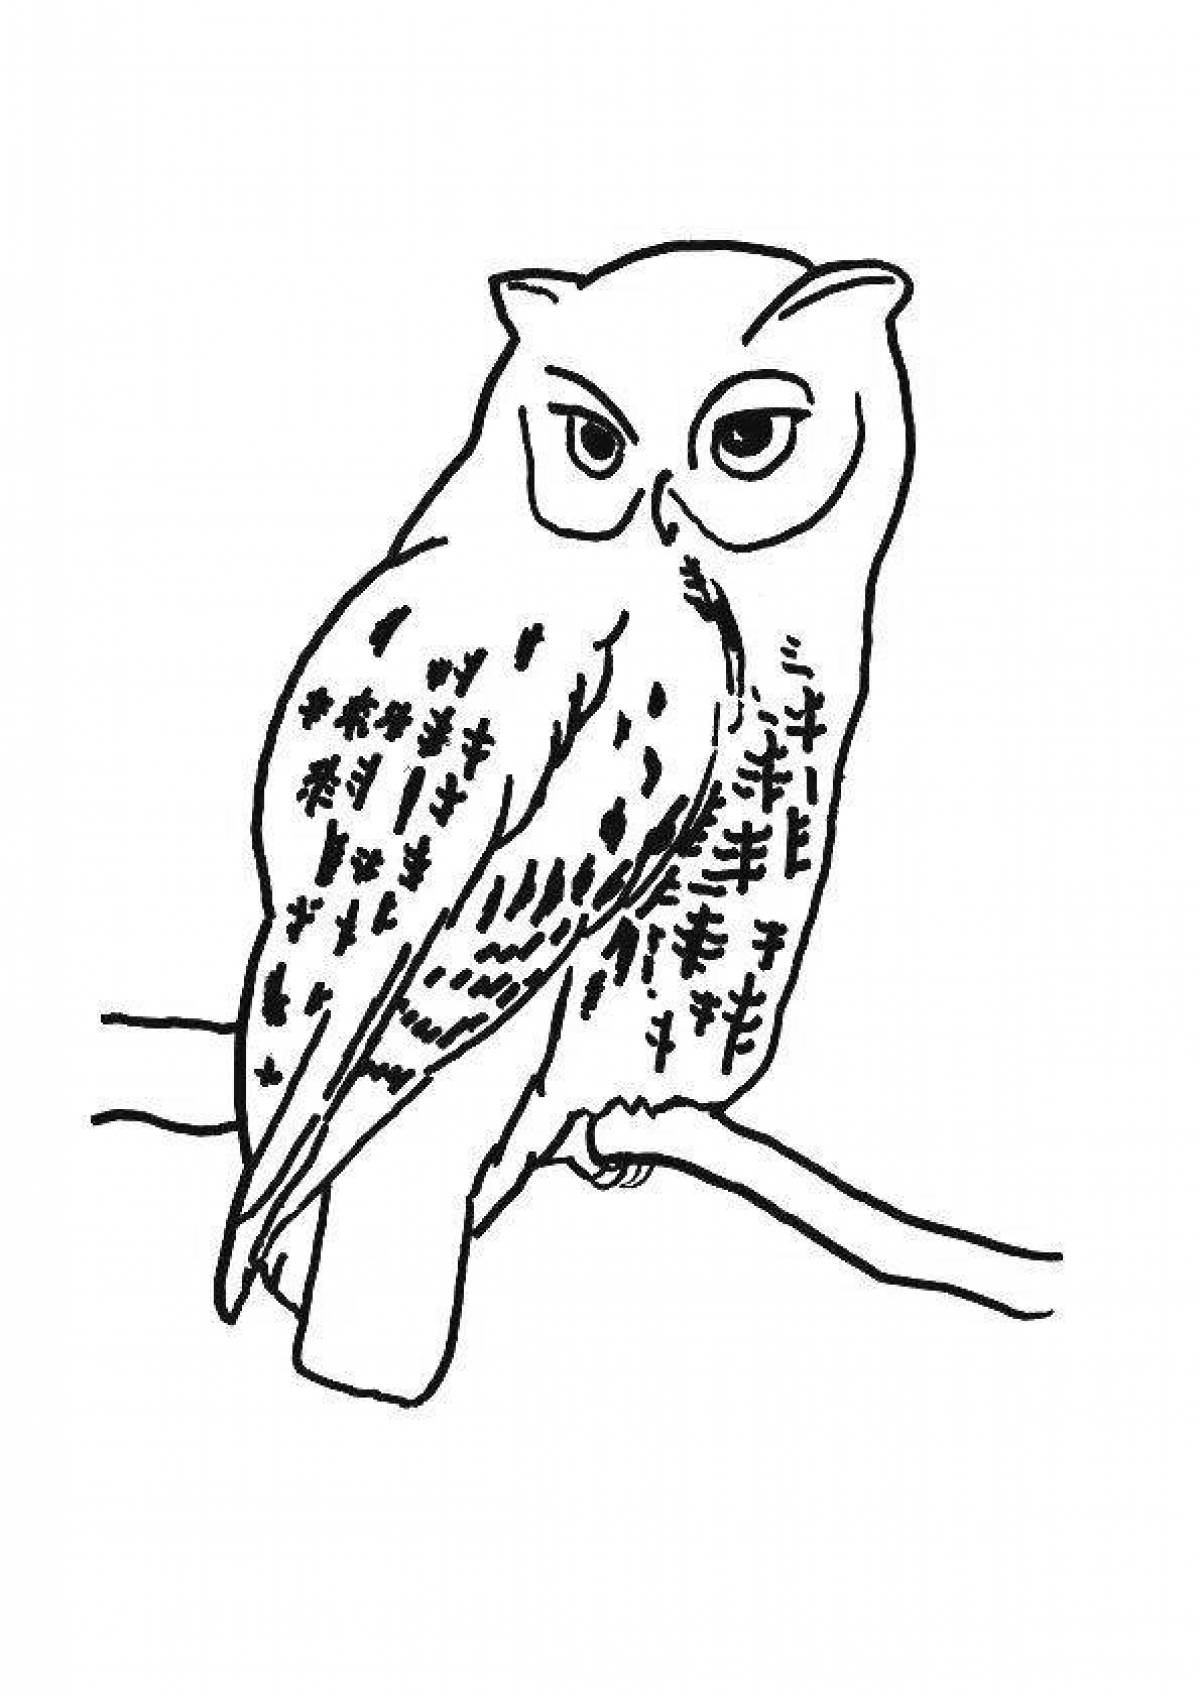 Coloring book shining snowy owl